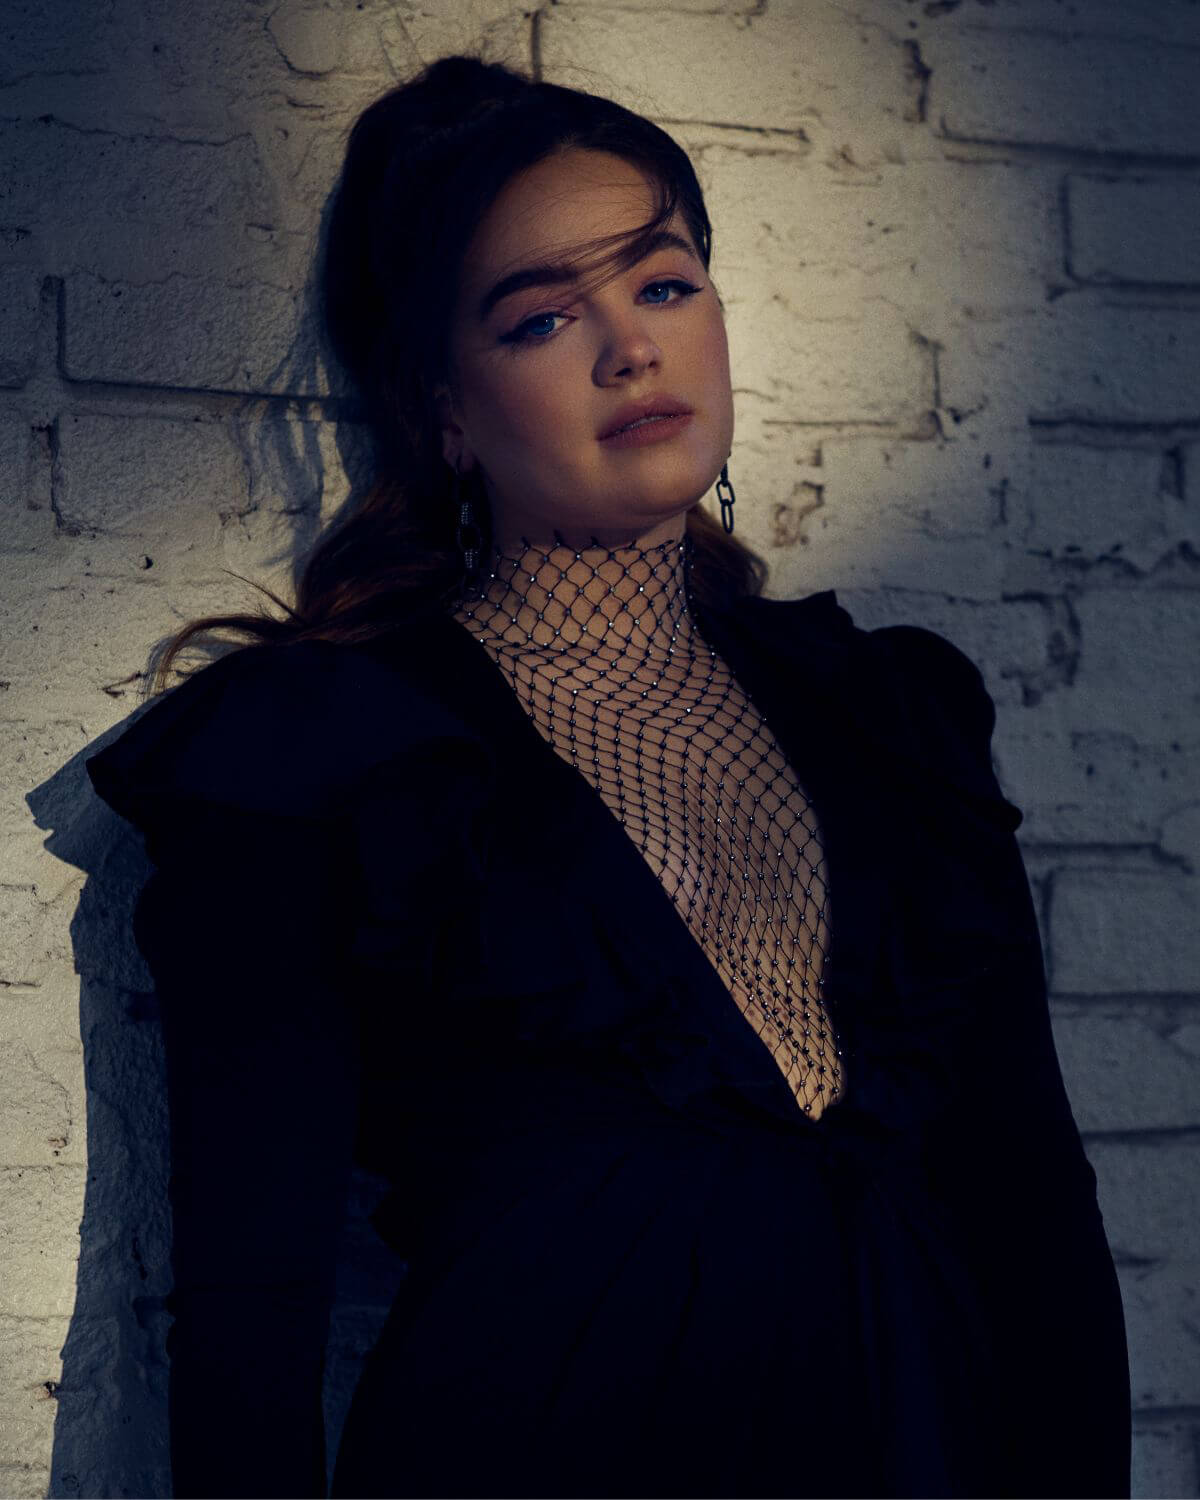 Mary Mouser Photoshoot for Euphoria Magazine, March 2021